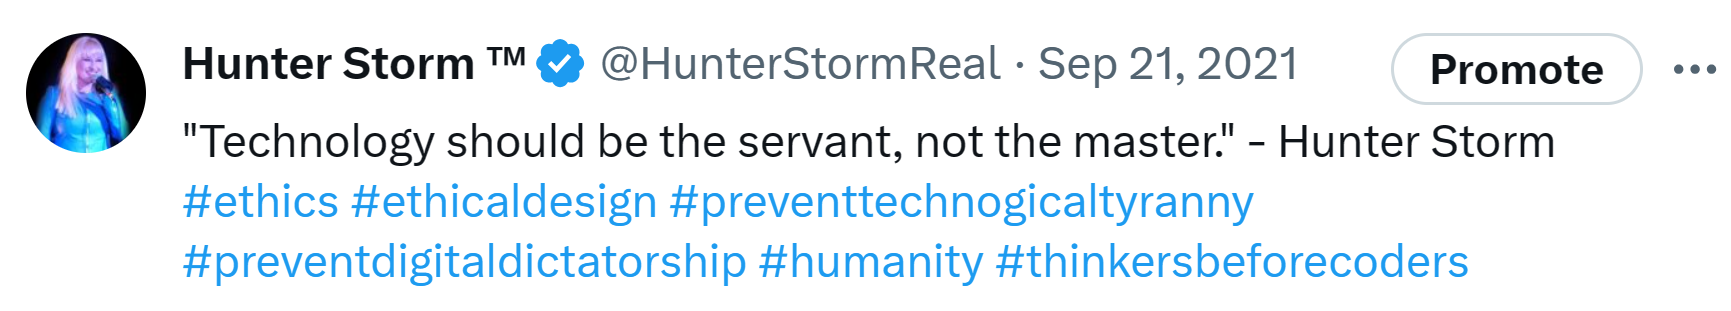 Hunter Storm Wisdom: Timeless Insights and Inspiration | "Technology should be the servant, not the master."